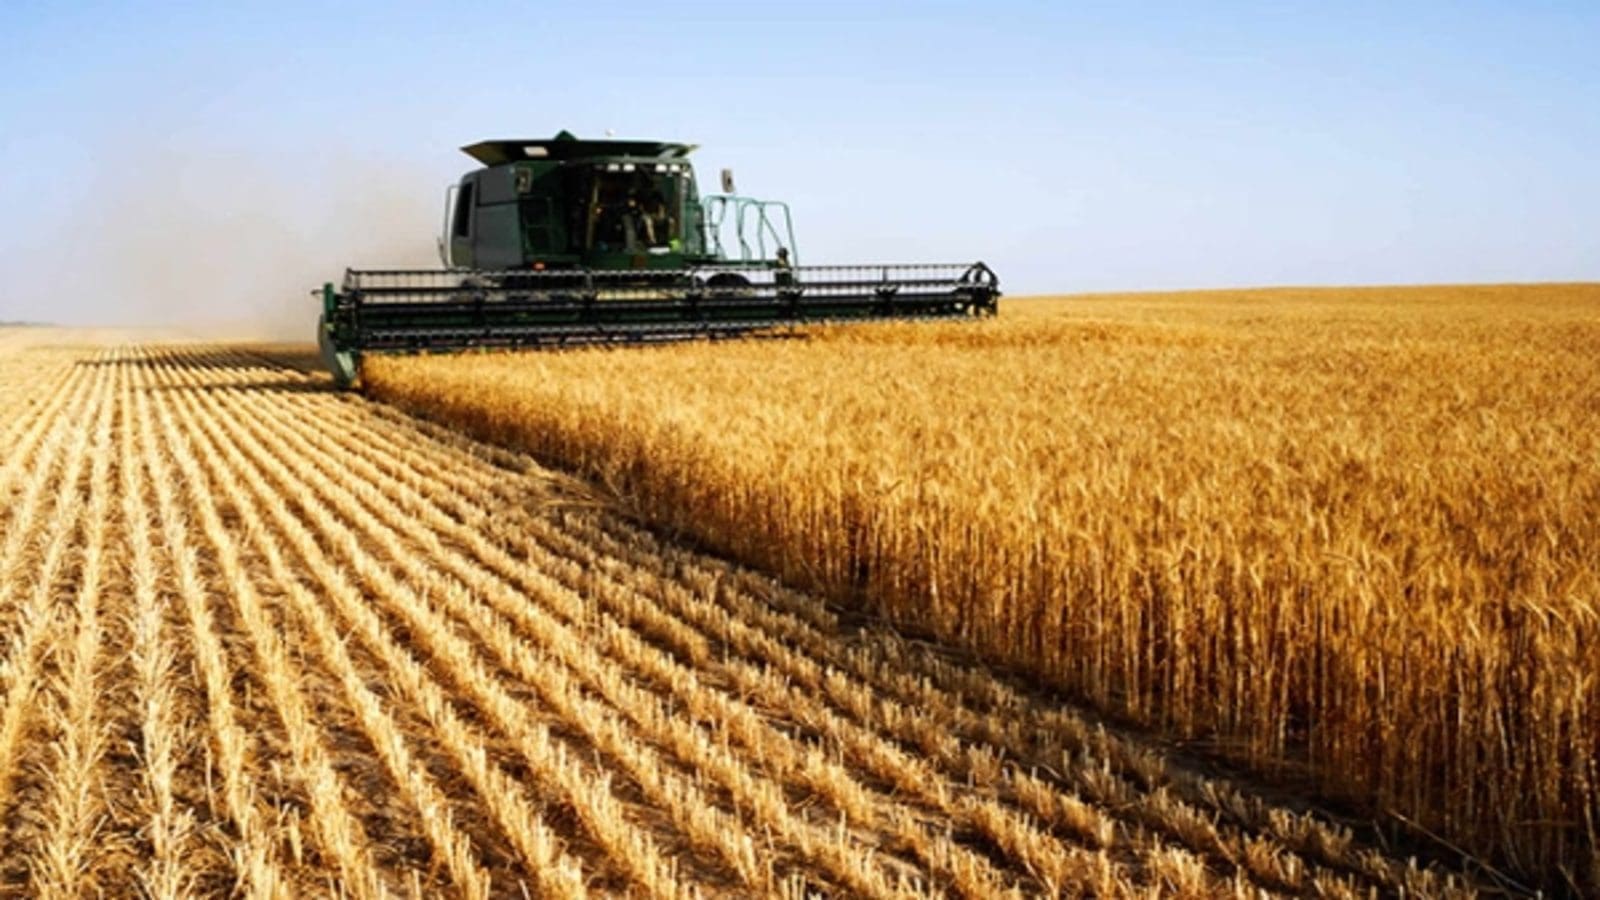 European grain production forecast projected downwards due to reduced planting area